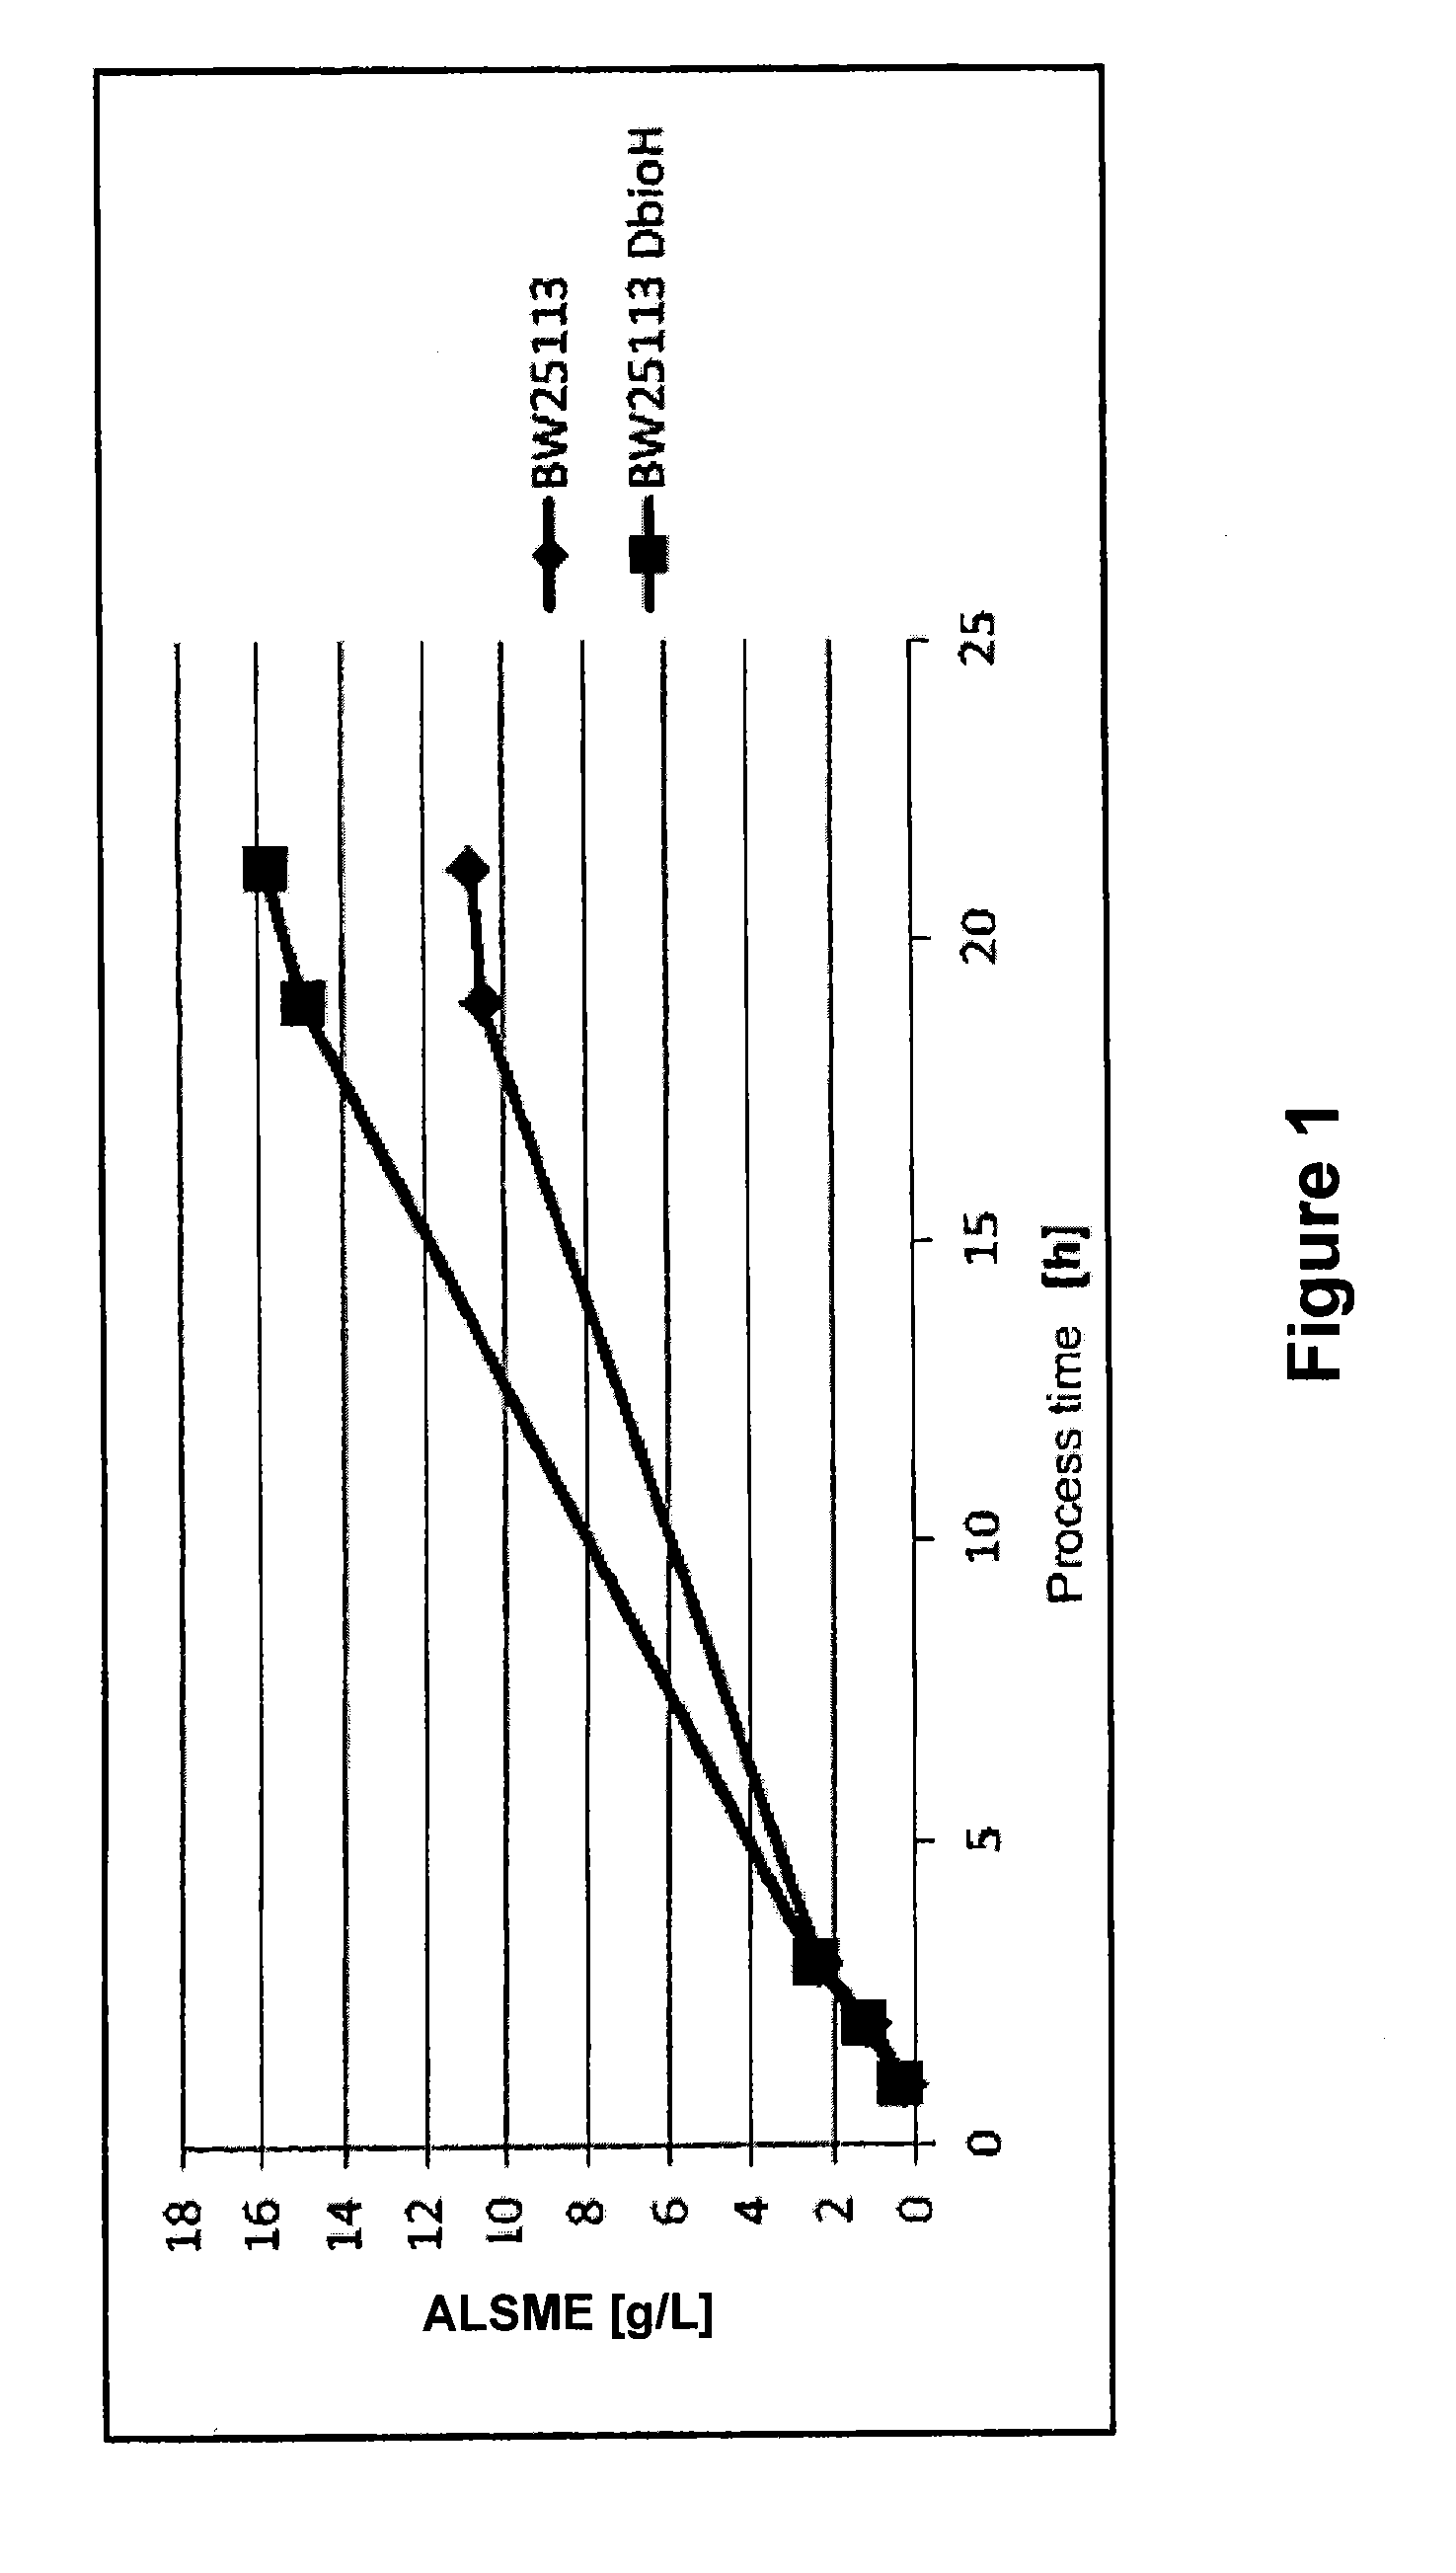 Process for reacting a carboxylic acid ester